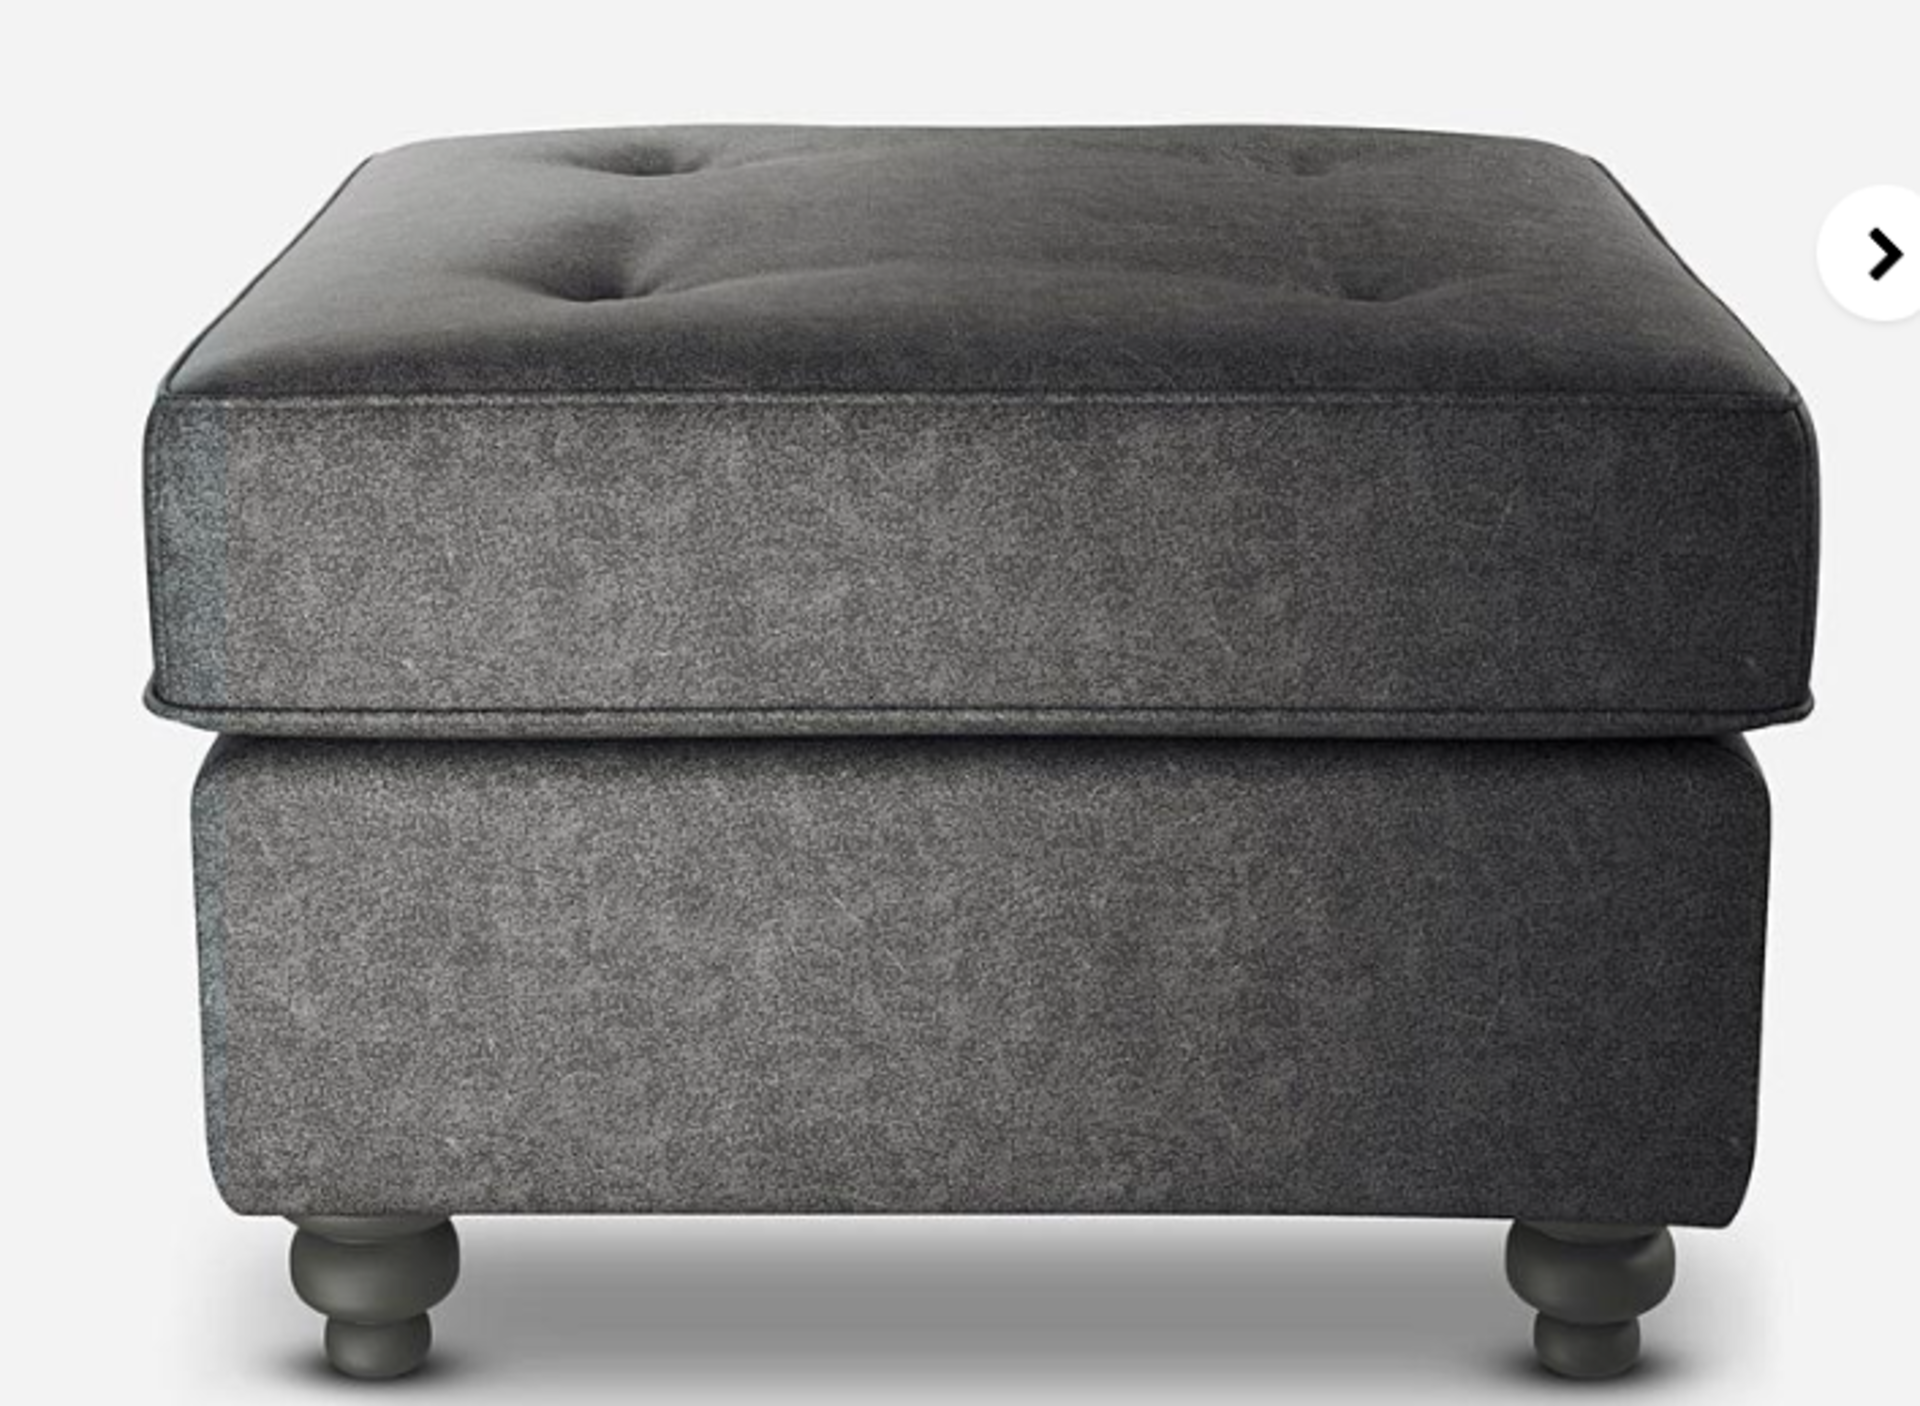 Oakland Footstool. - ER23. RRP £249.00. The Oakland range is perfect for those wanting a traditional